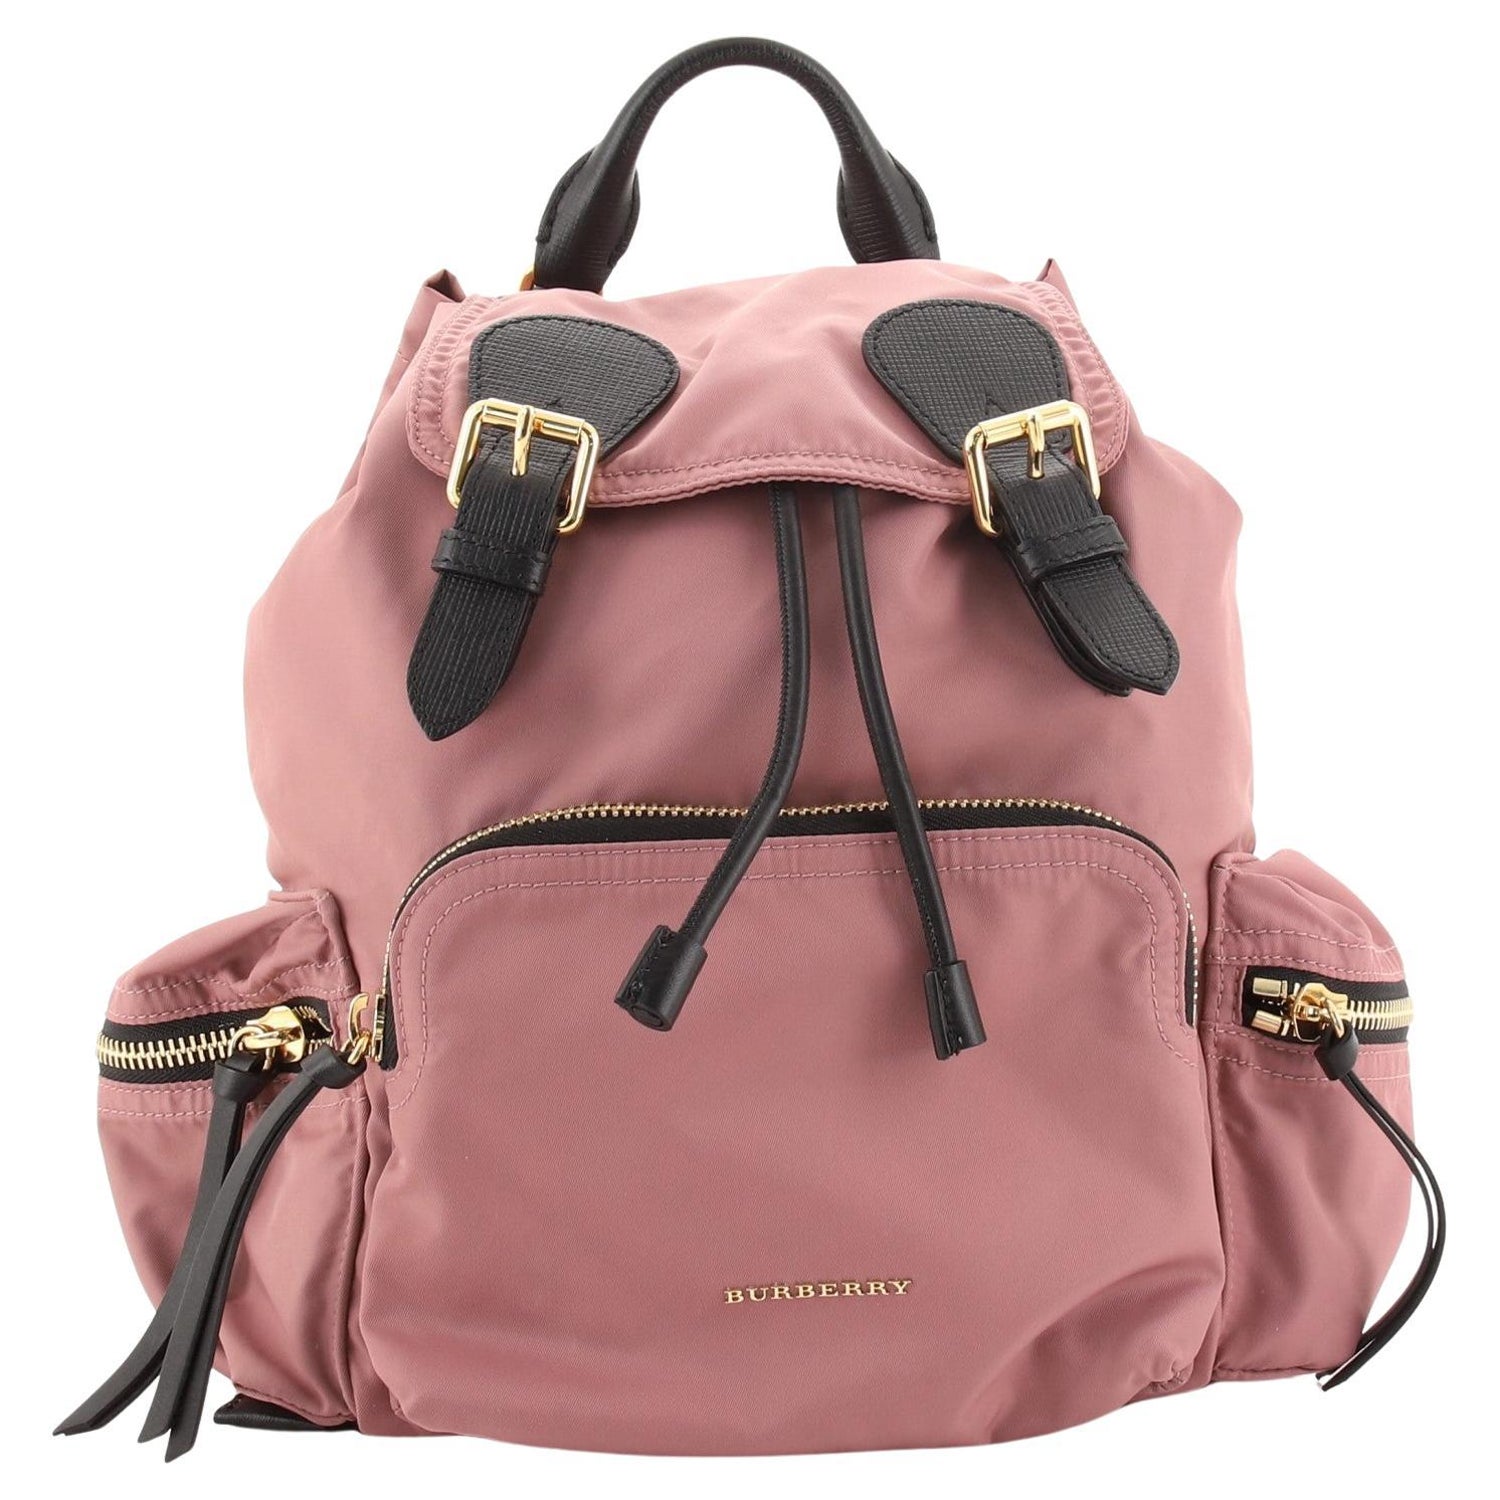 Burberry Backpack Pink - For Sale on 1stDibs | burberry backpack sale, pink burberry  backpack